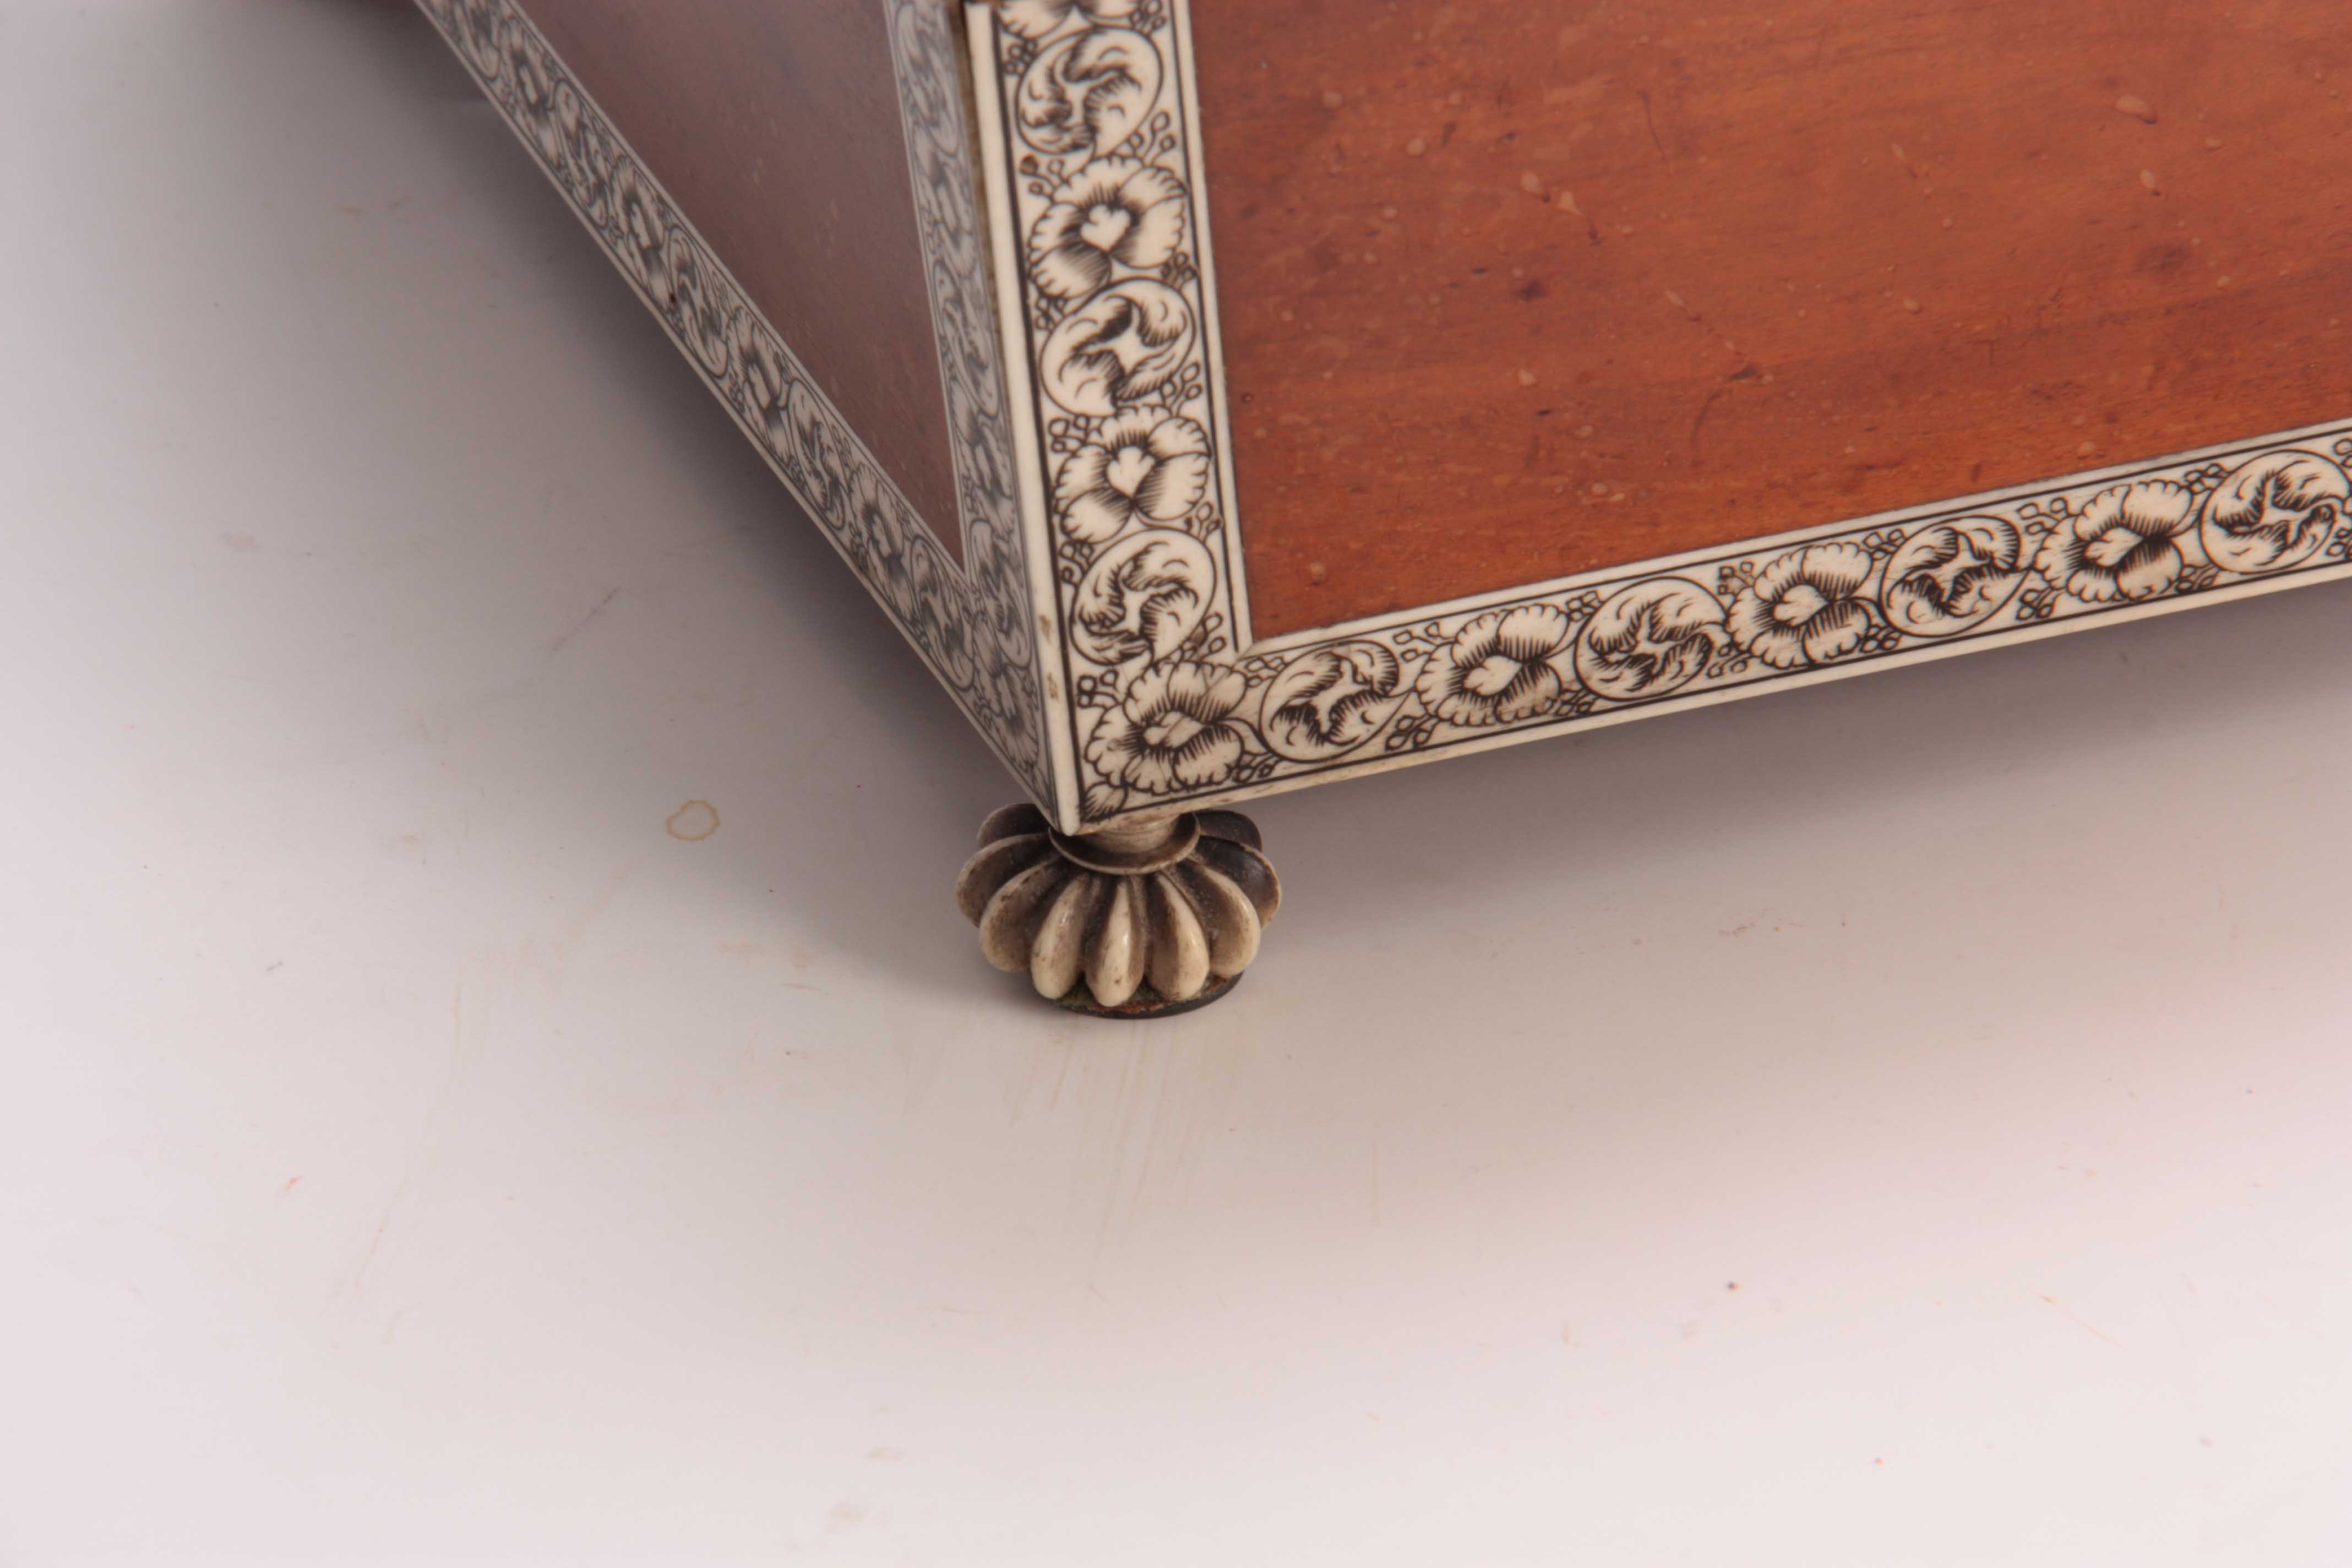 A FINE 19TH CENTURY VIZAGAPATAM ANGLO INDIAN IVORY AND SANDALWOOD JEWELLERY CASKET with gadrooned - Image 4 of 6